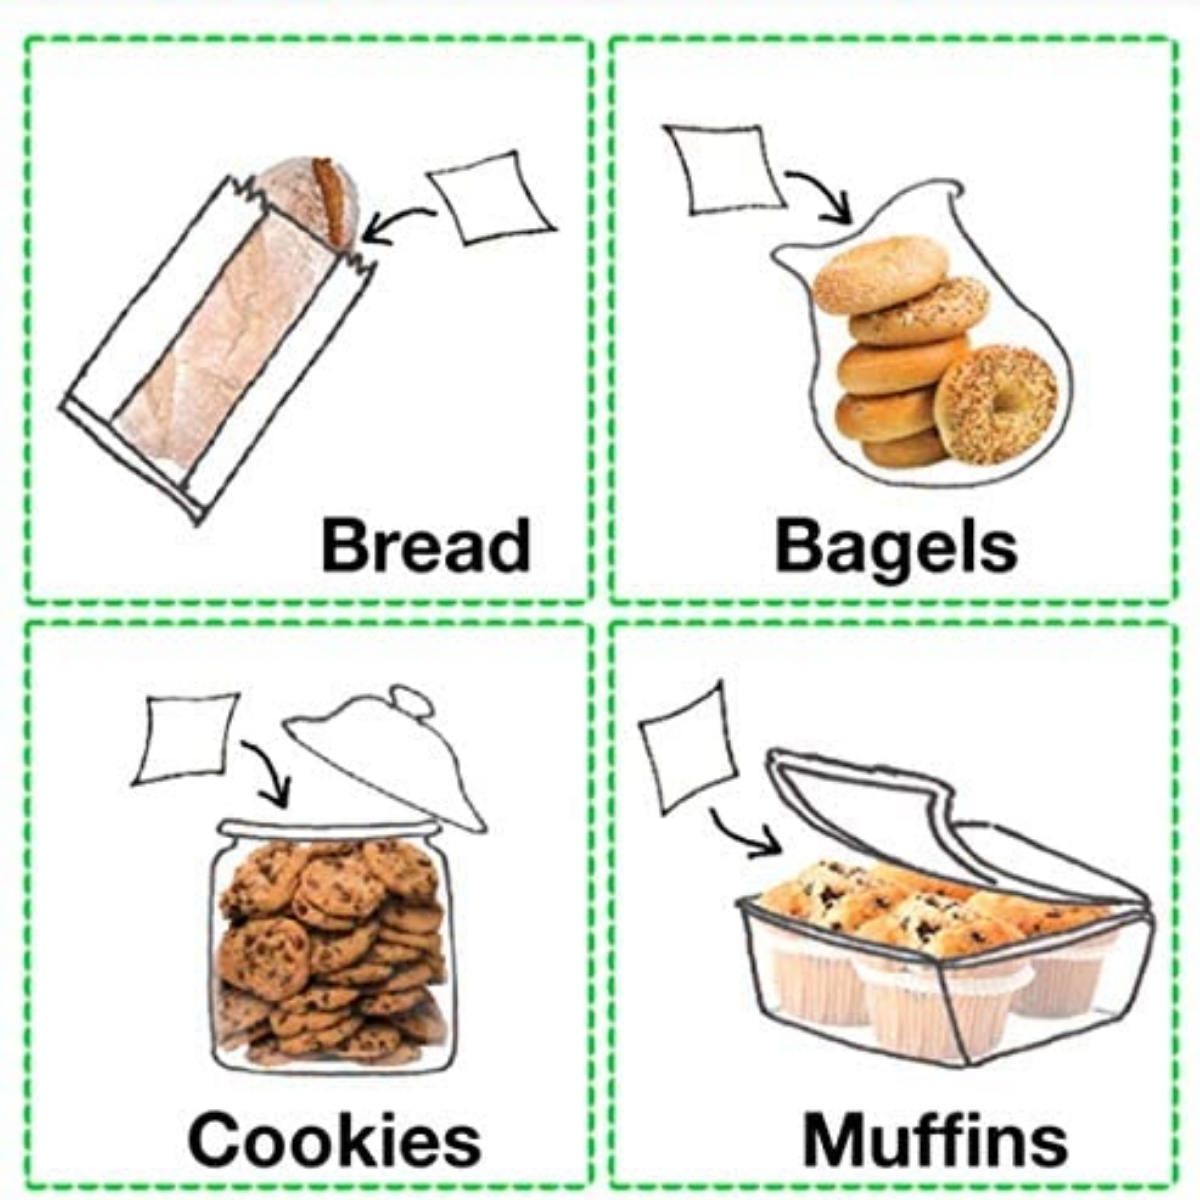 FreshPaper Food Saver Sheets for Bread | Keep Baked Goods Fresh | Perfect Bagels